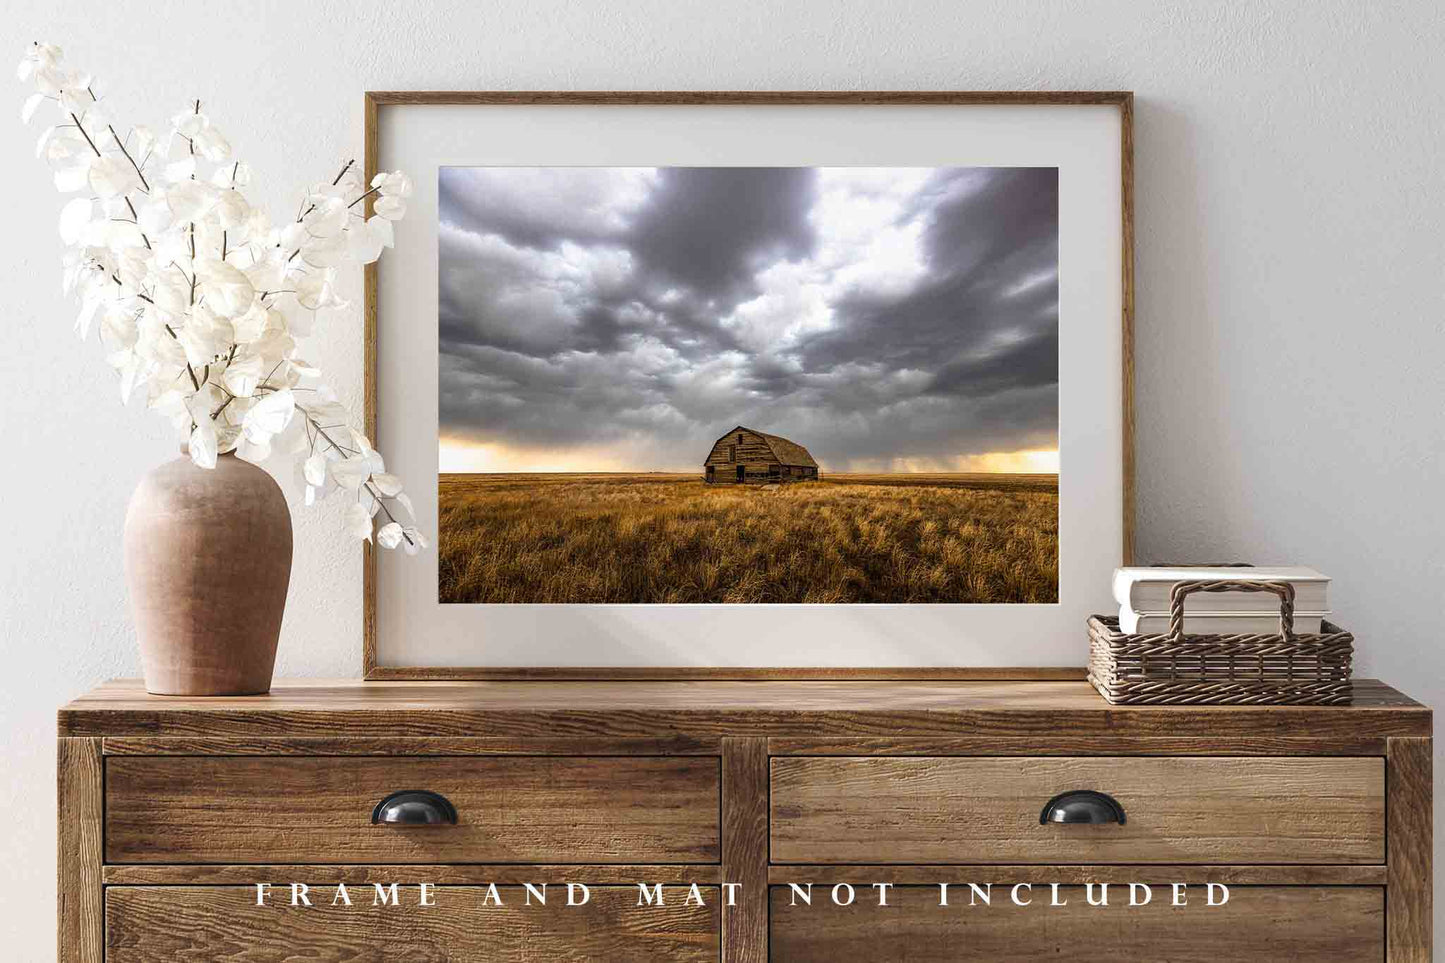 Country Photo Print | Old Barn Under Stormy Sky Picture | Oklahoma Wall Art | Great Plains Photography | Farmhouse Decor